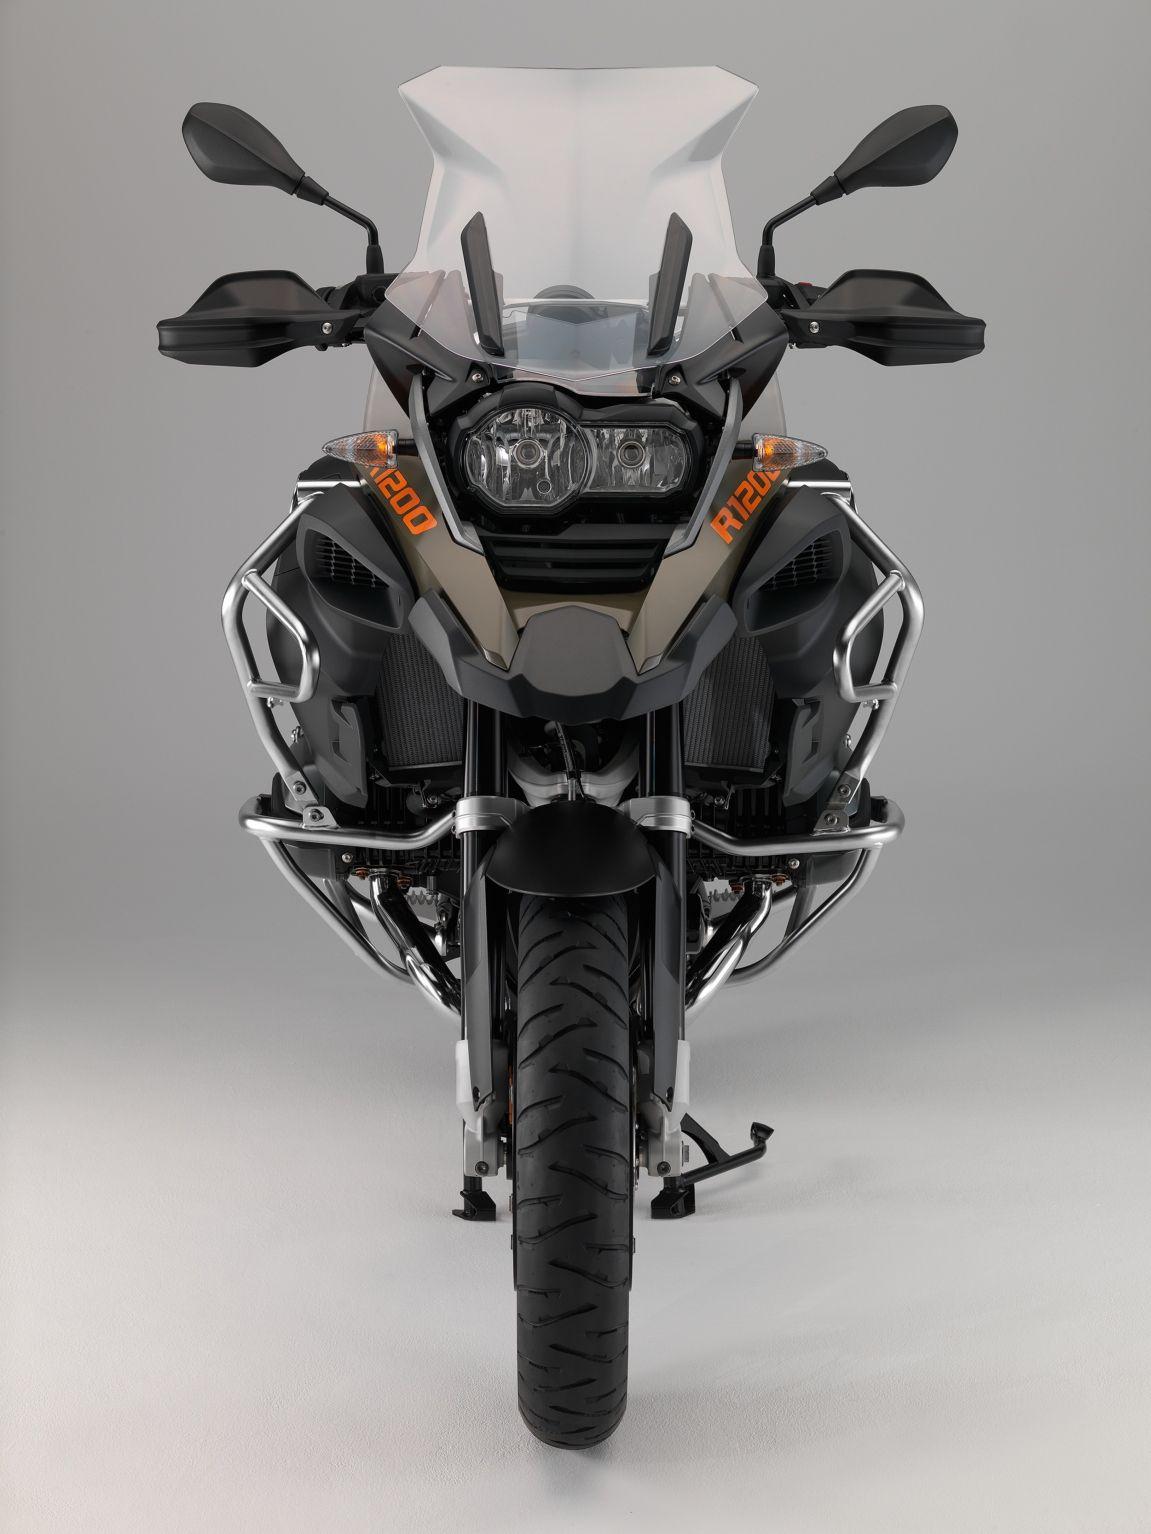 Picture of the 2014 BMW R1200GS Adventure